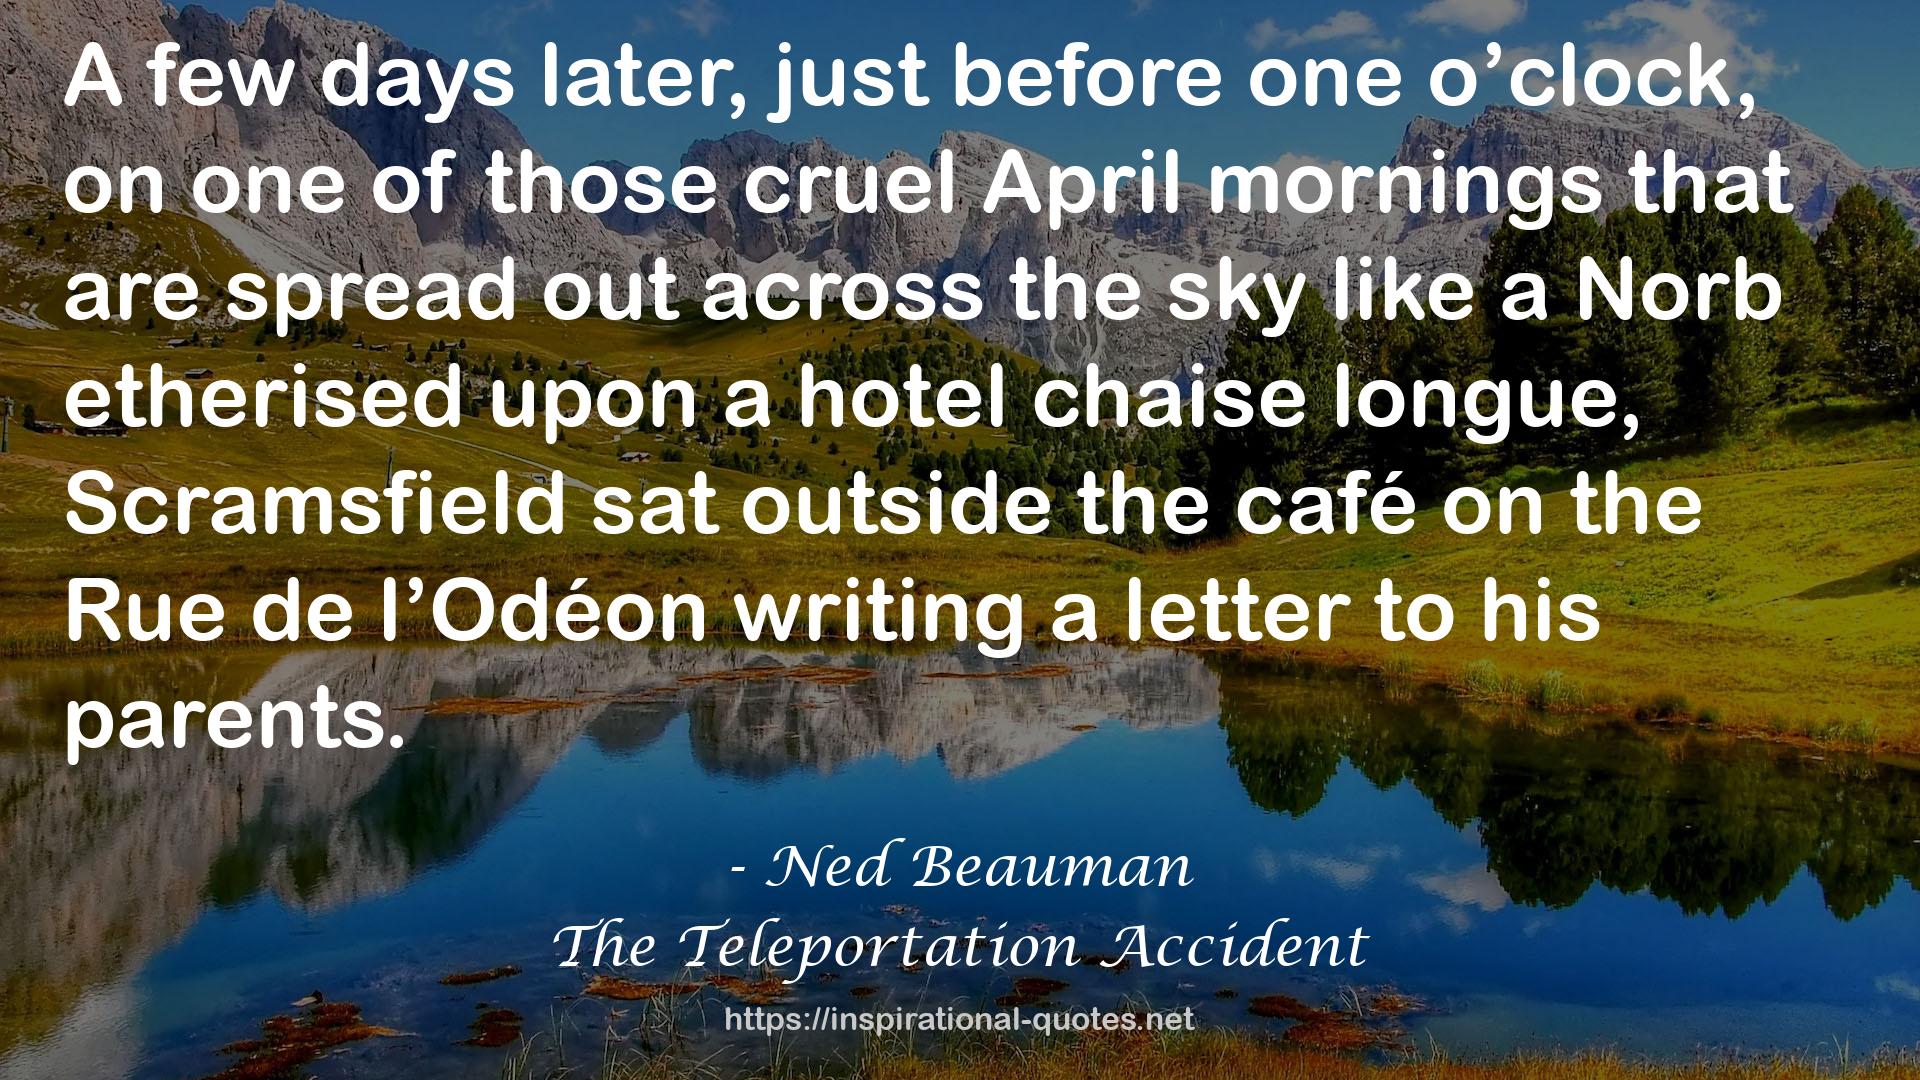 Ned Beauman QUOTES